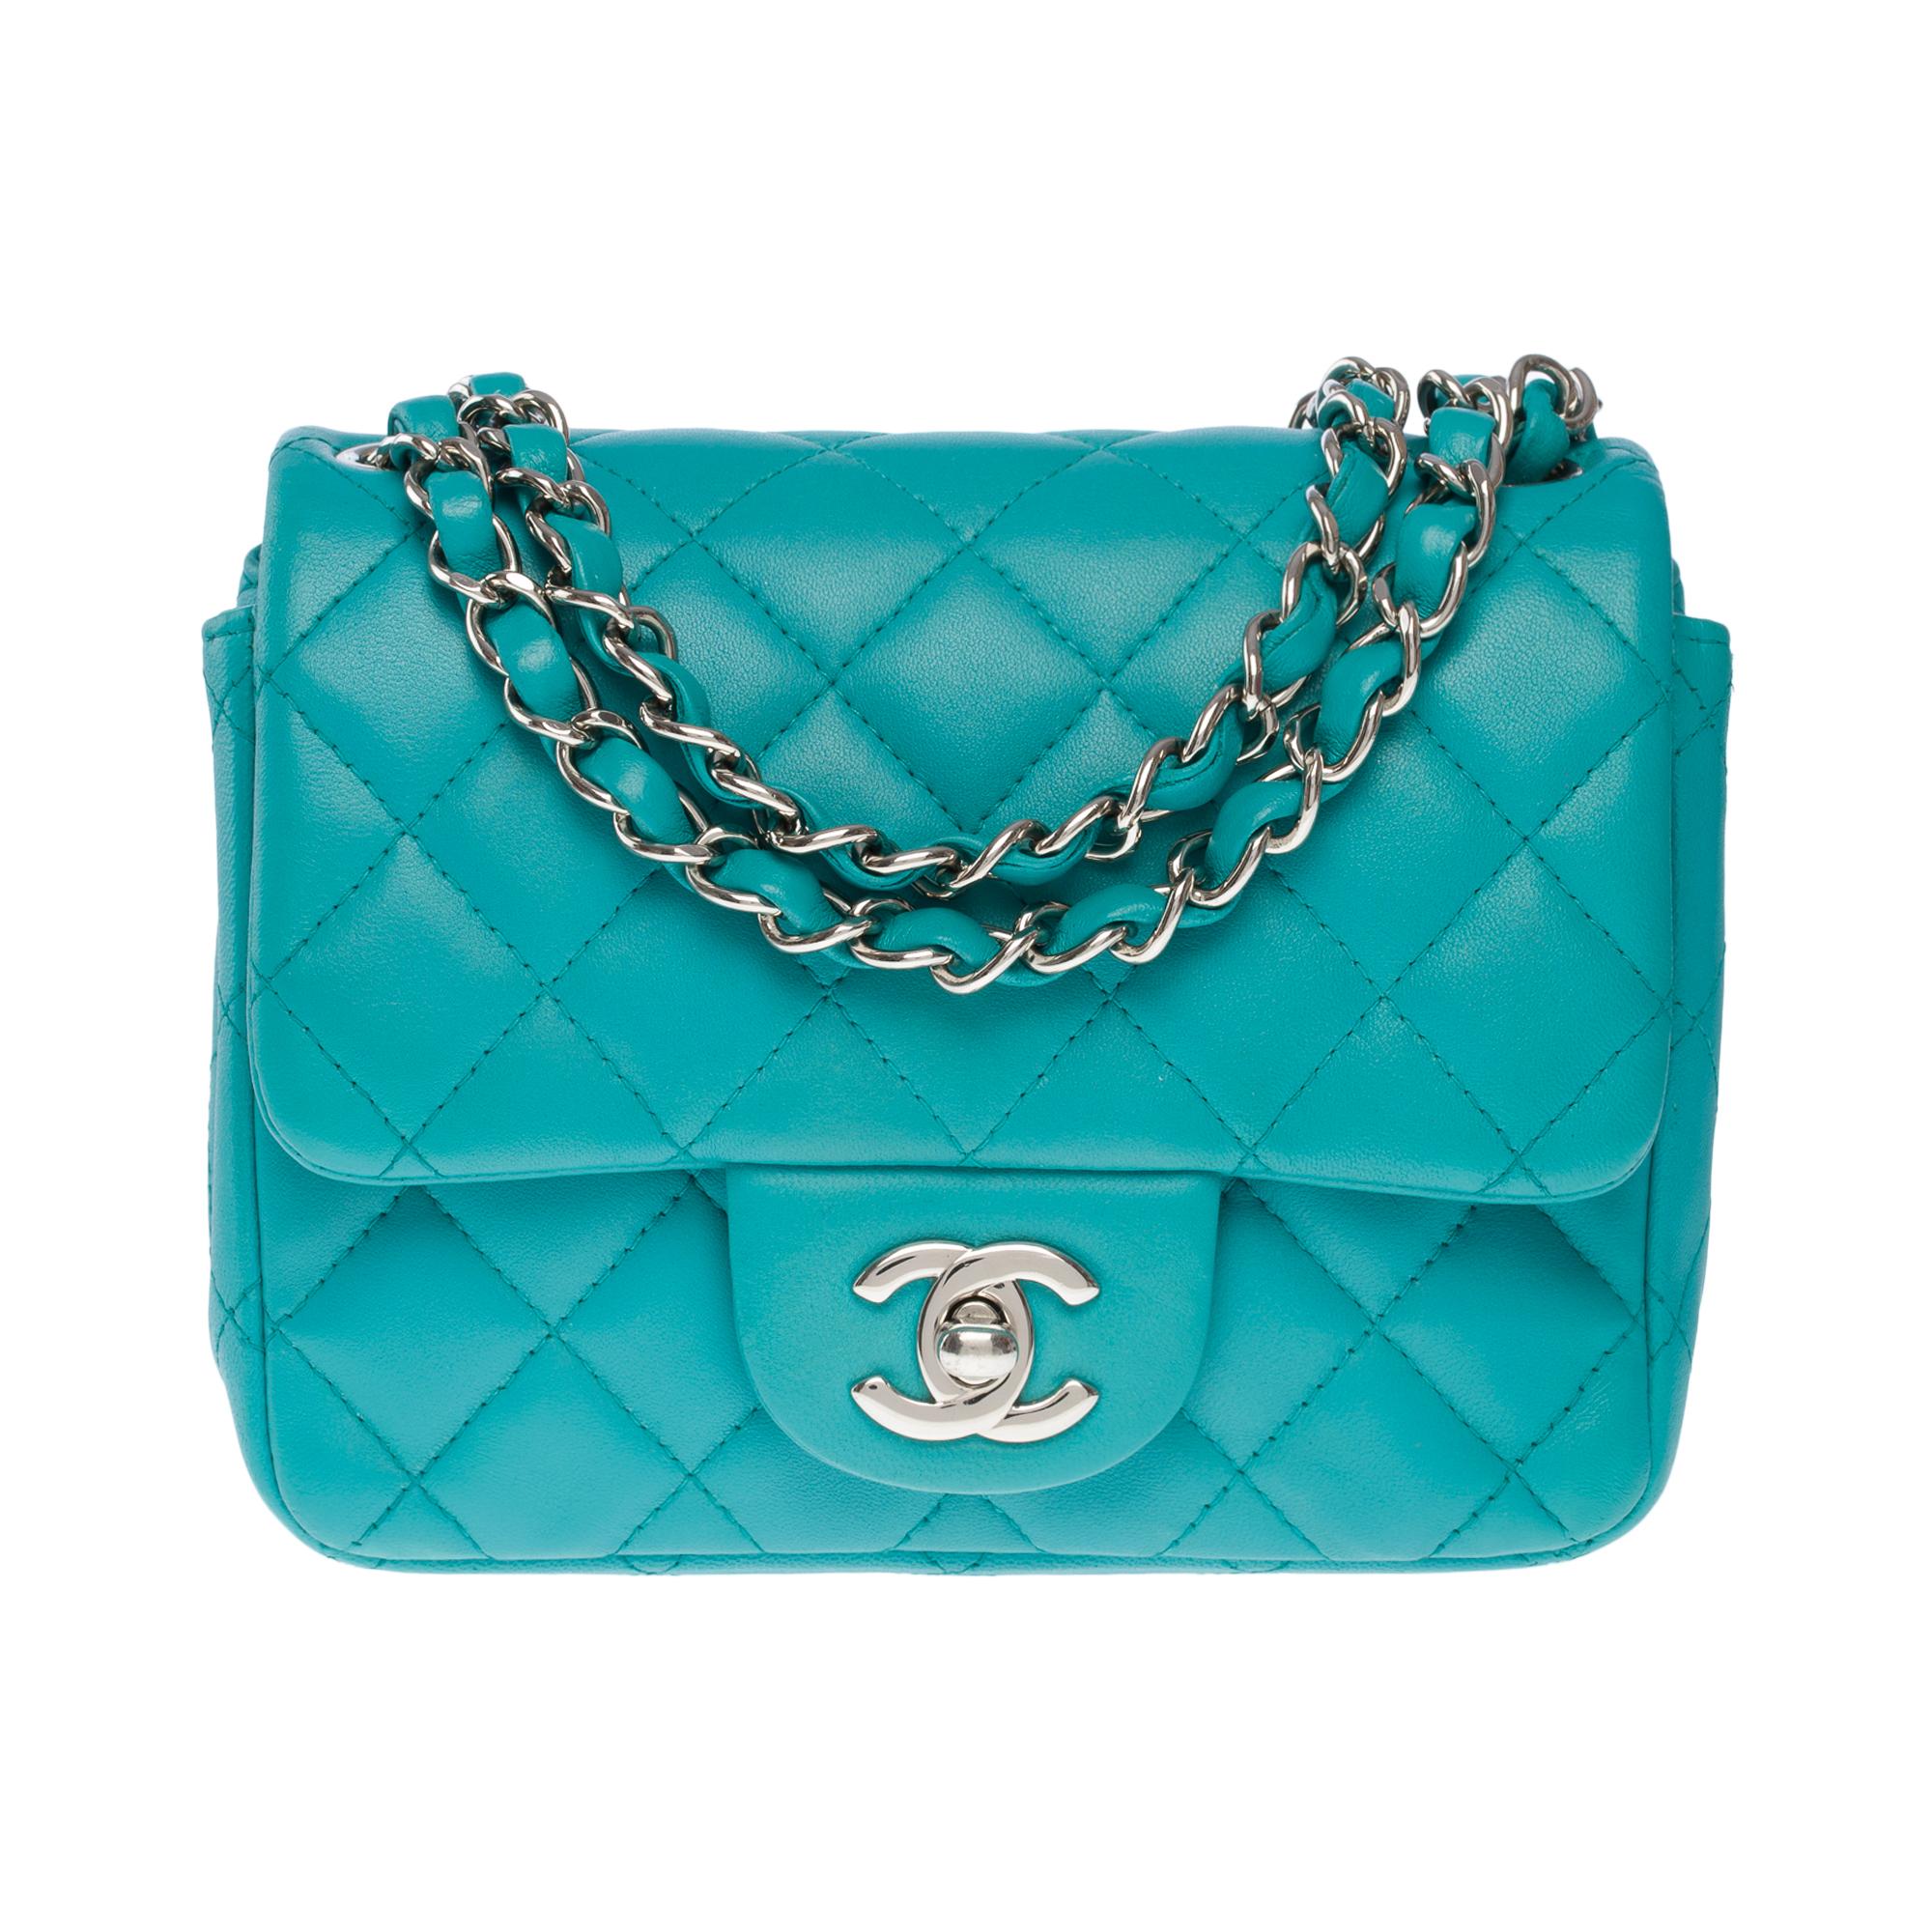 Superb​ ​Chanel​ ​Mini​ ​Timeless​ ​single​ ​shoulder​ ​flap​ ​bag​ ​in​ ​vert​ ​d'eau​ (water green) ​quilted​ ​lambskin​ ​leather,​ ​silver​ ​metal​ ​trim,​ ​a​ ​silver​ ​metal​ ​chain​ ​interlaced​ ​with​ ​green​ ​leather​ ​allowing​ ​a​